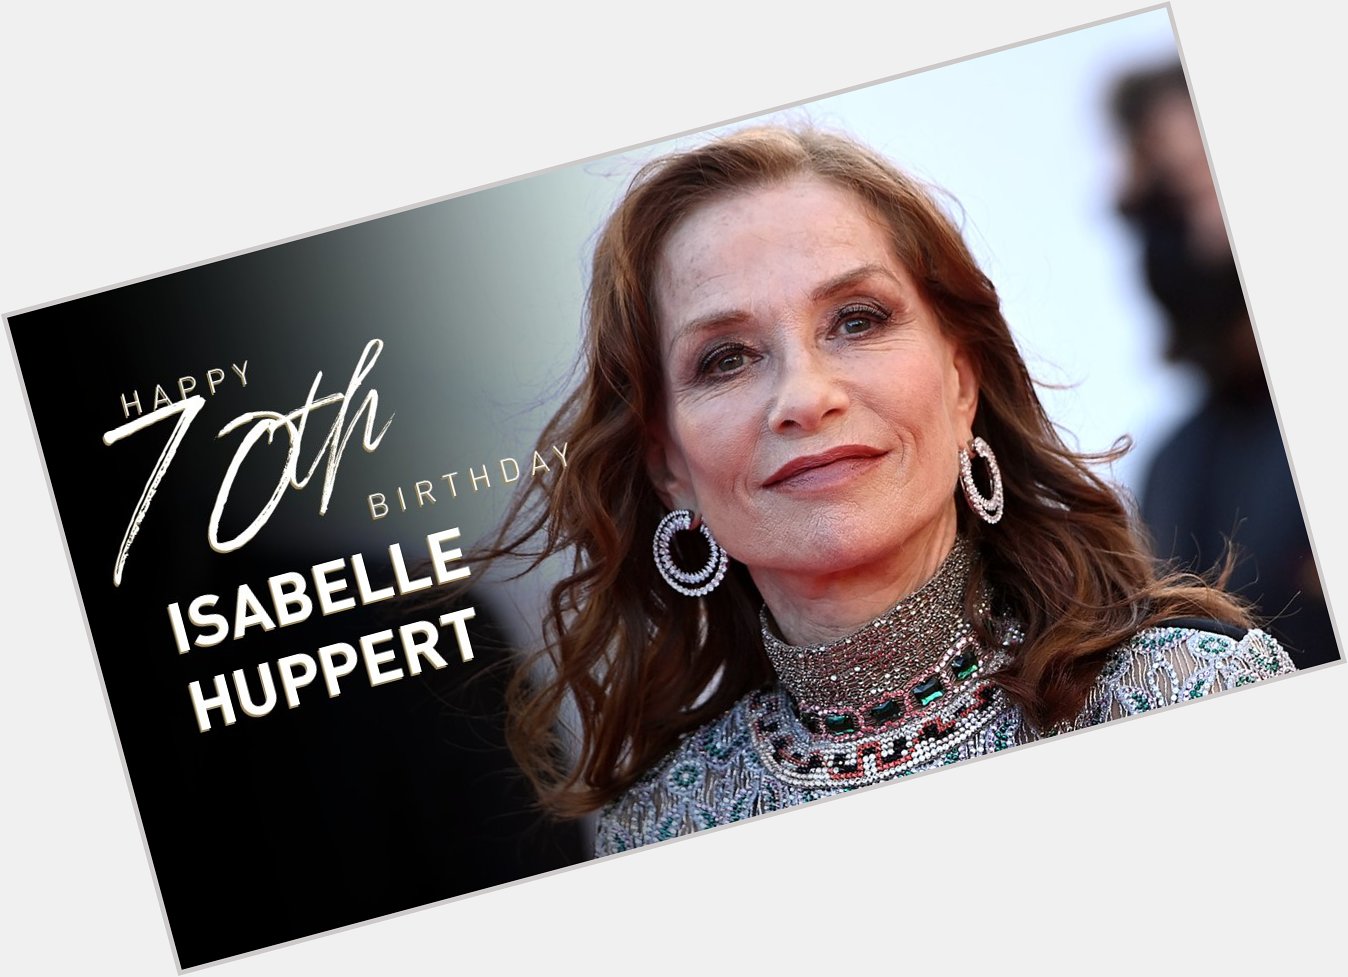 Happy 70th birthday Isabelle Huppert!

Read her tribute here:  